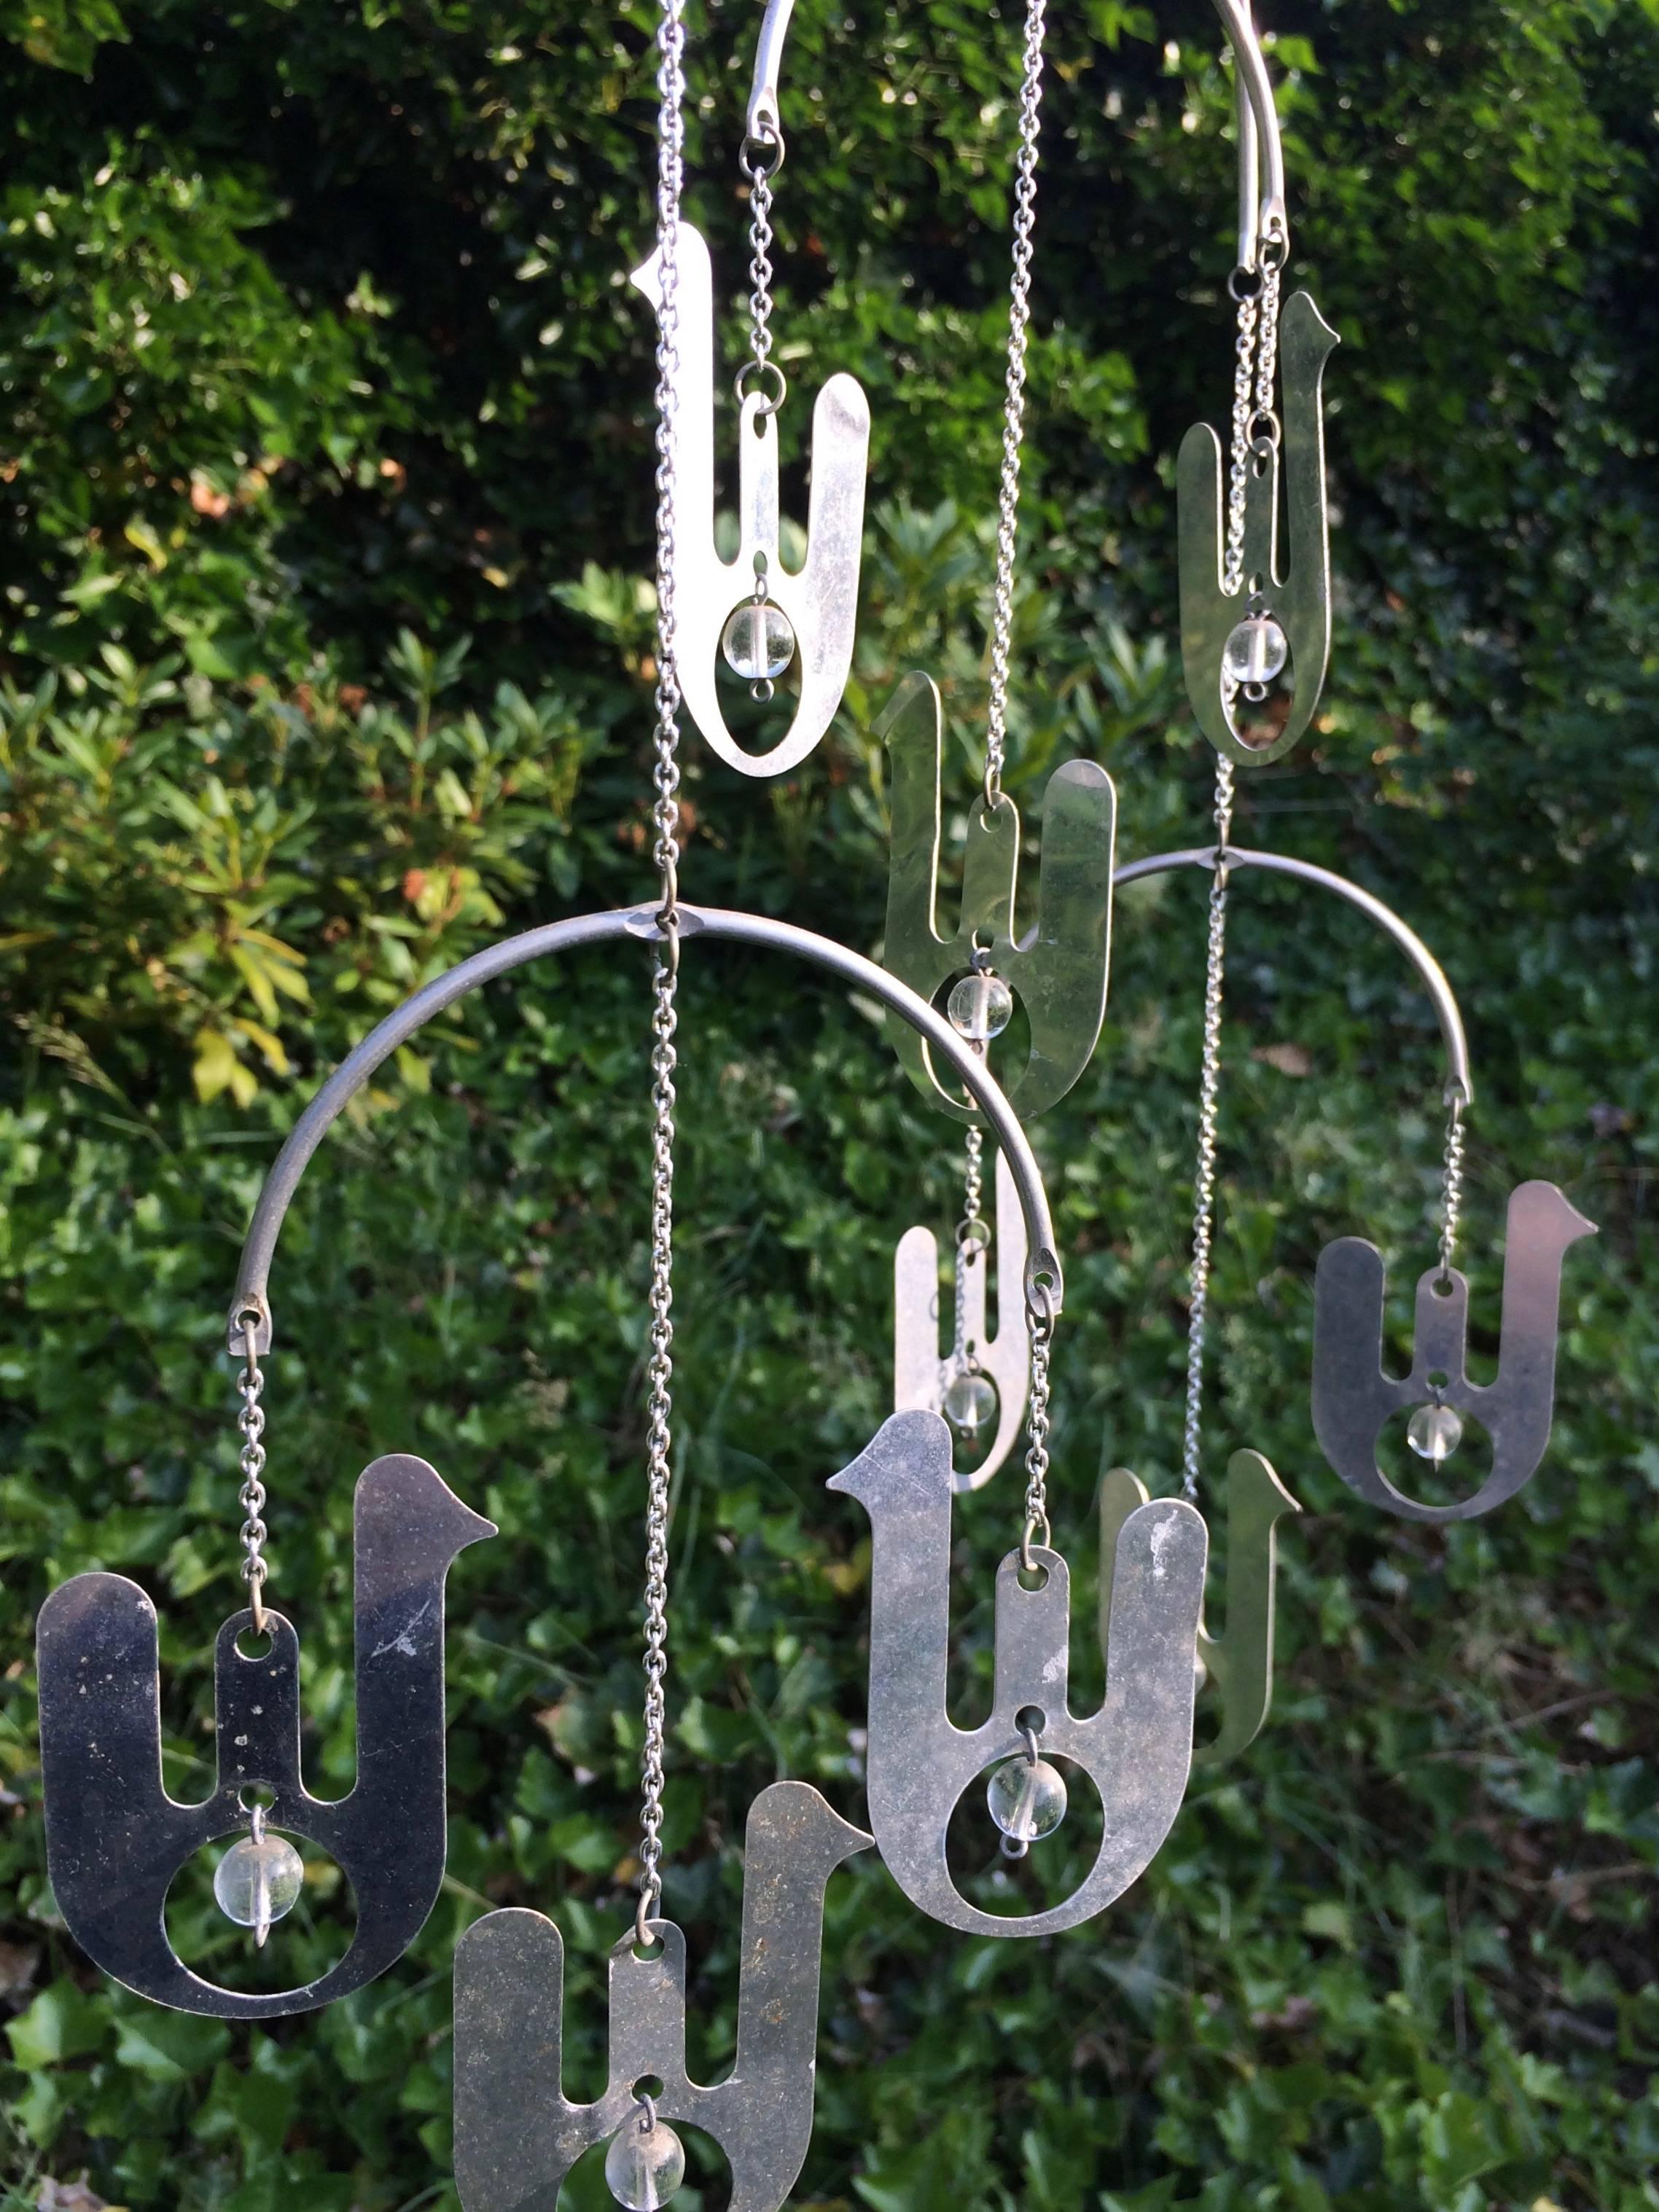 Abstract bird's on chains mobile in aluminum with transparent beads made by Raija Aarikka, Finland during the 1970s.